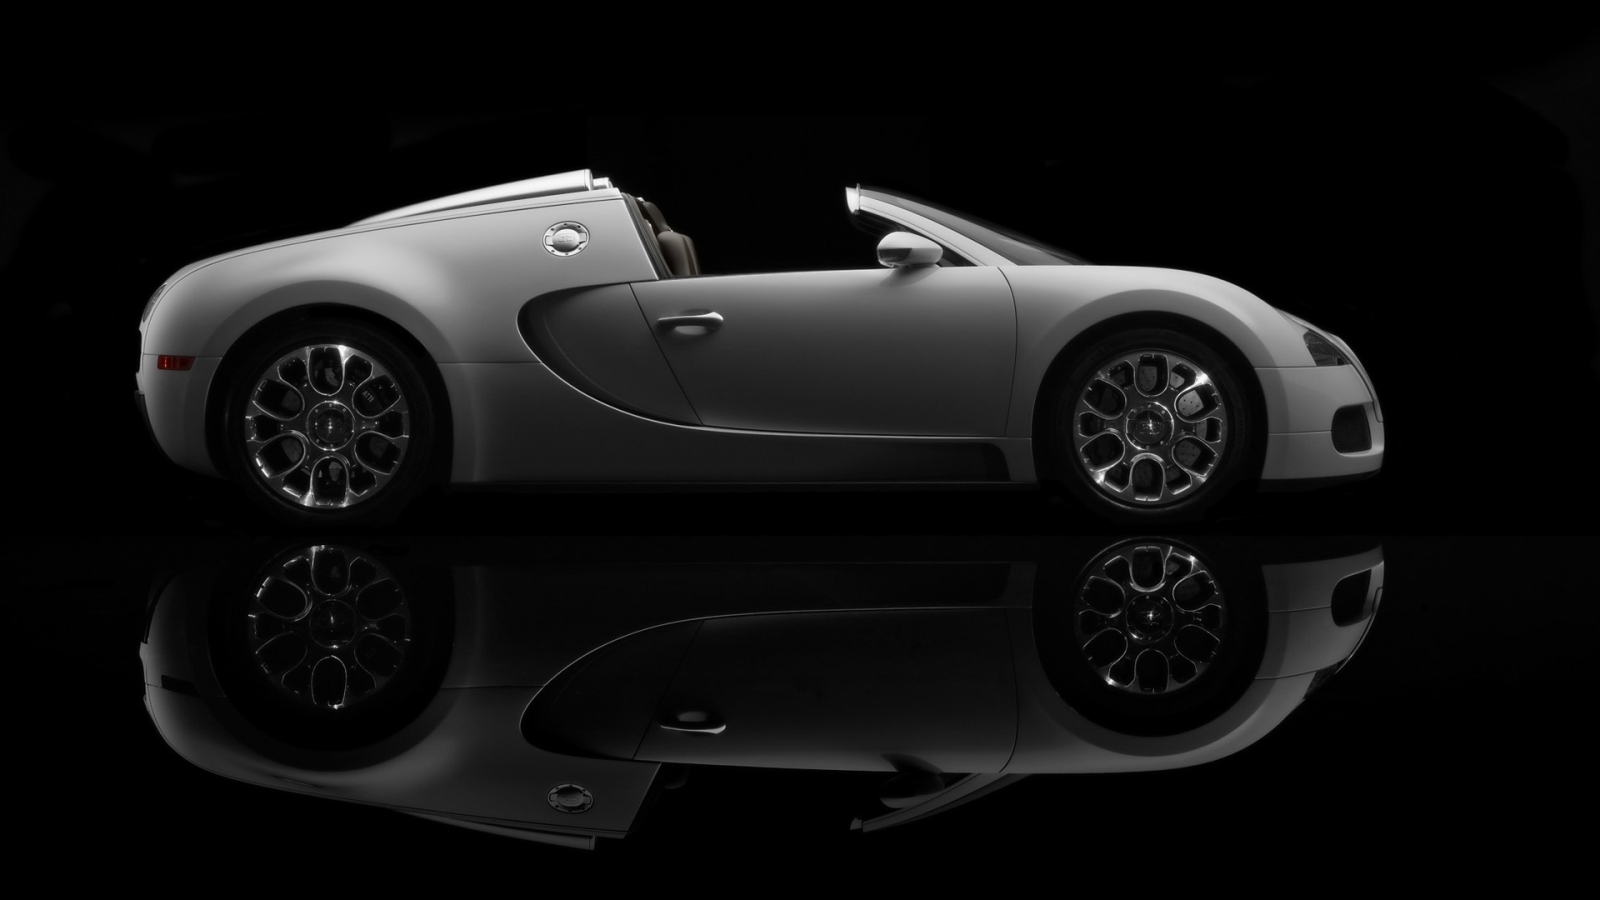 Bugatti Veyron 16.4 Grand Sport Production 2009 Version - Side Topless for 1600 x 900 HDTV resolution